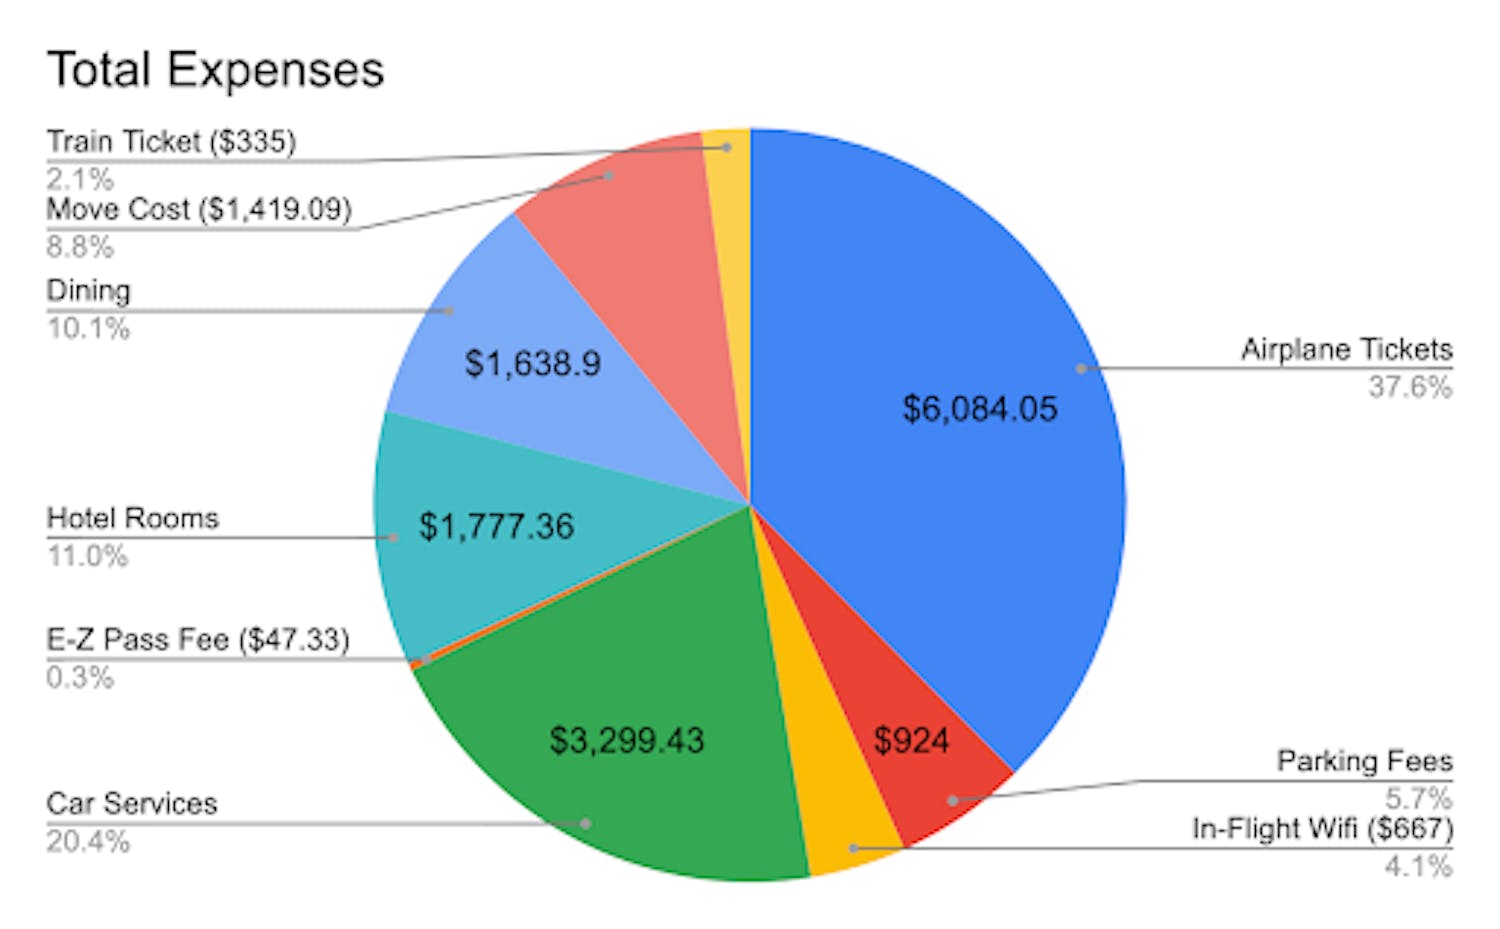 President Bernstein’s expenses are funded by the President’s Office (Chart by Victoria Gladstone).